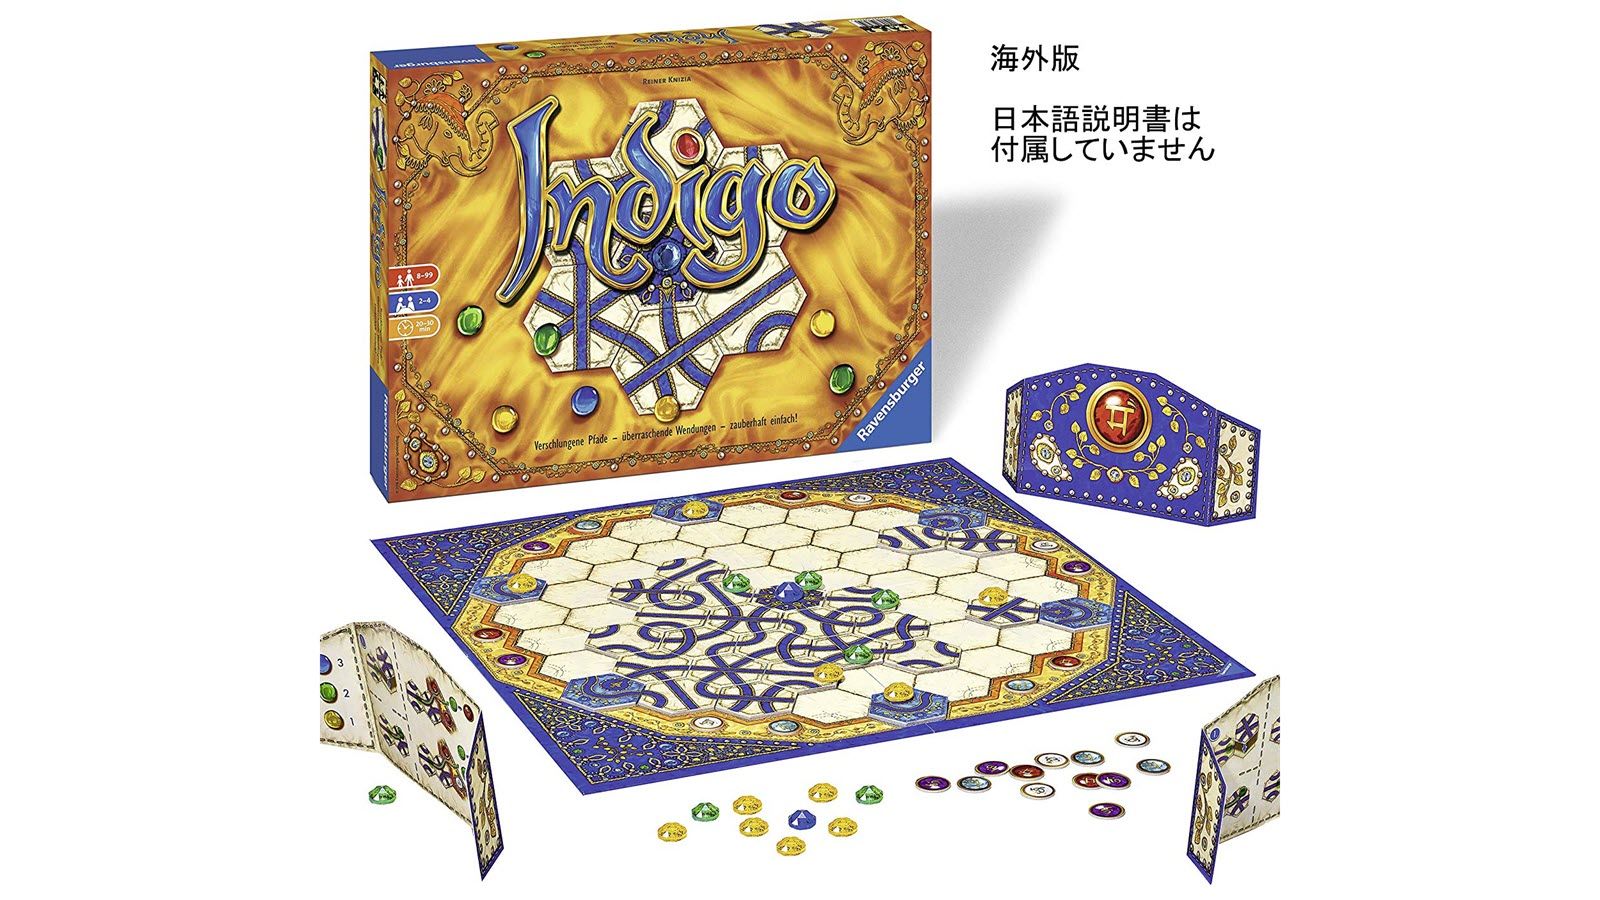 The Indigo board game box, and the gem pieces lying next to the open game board.